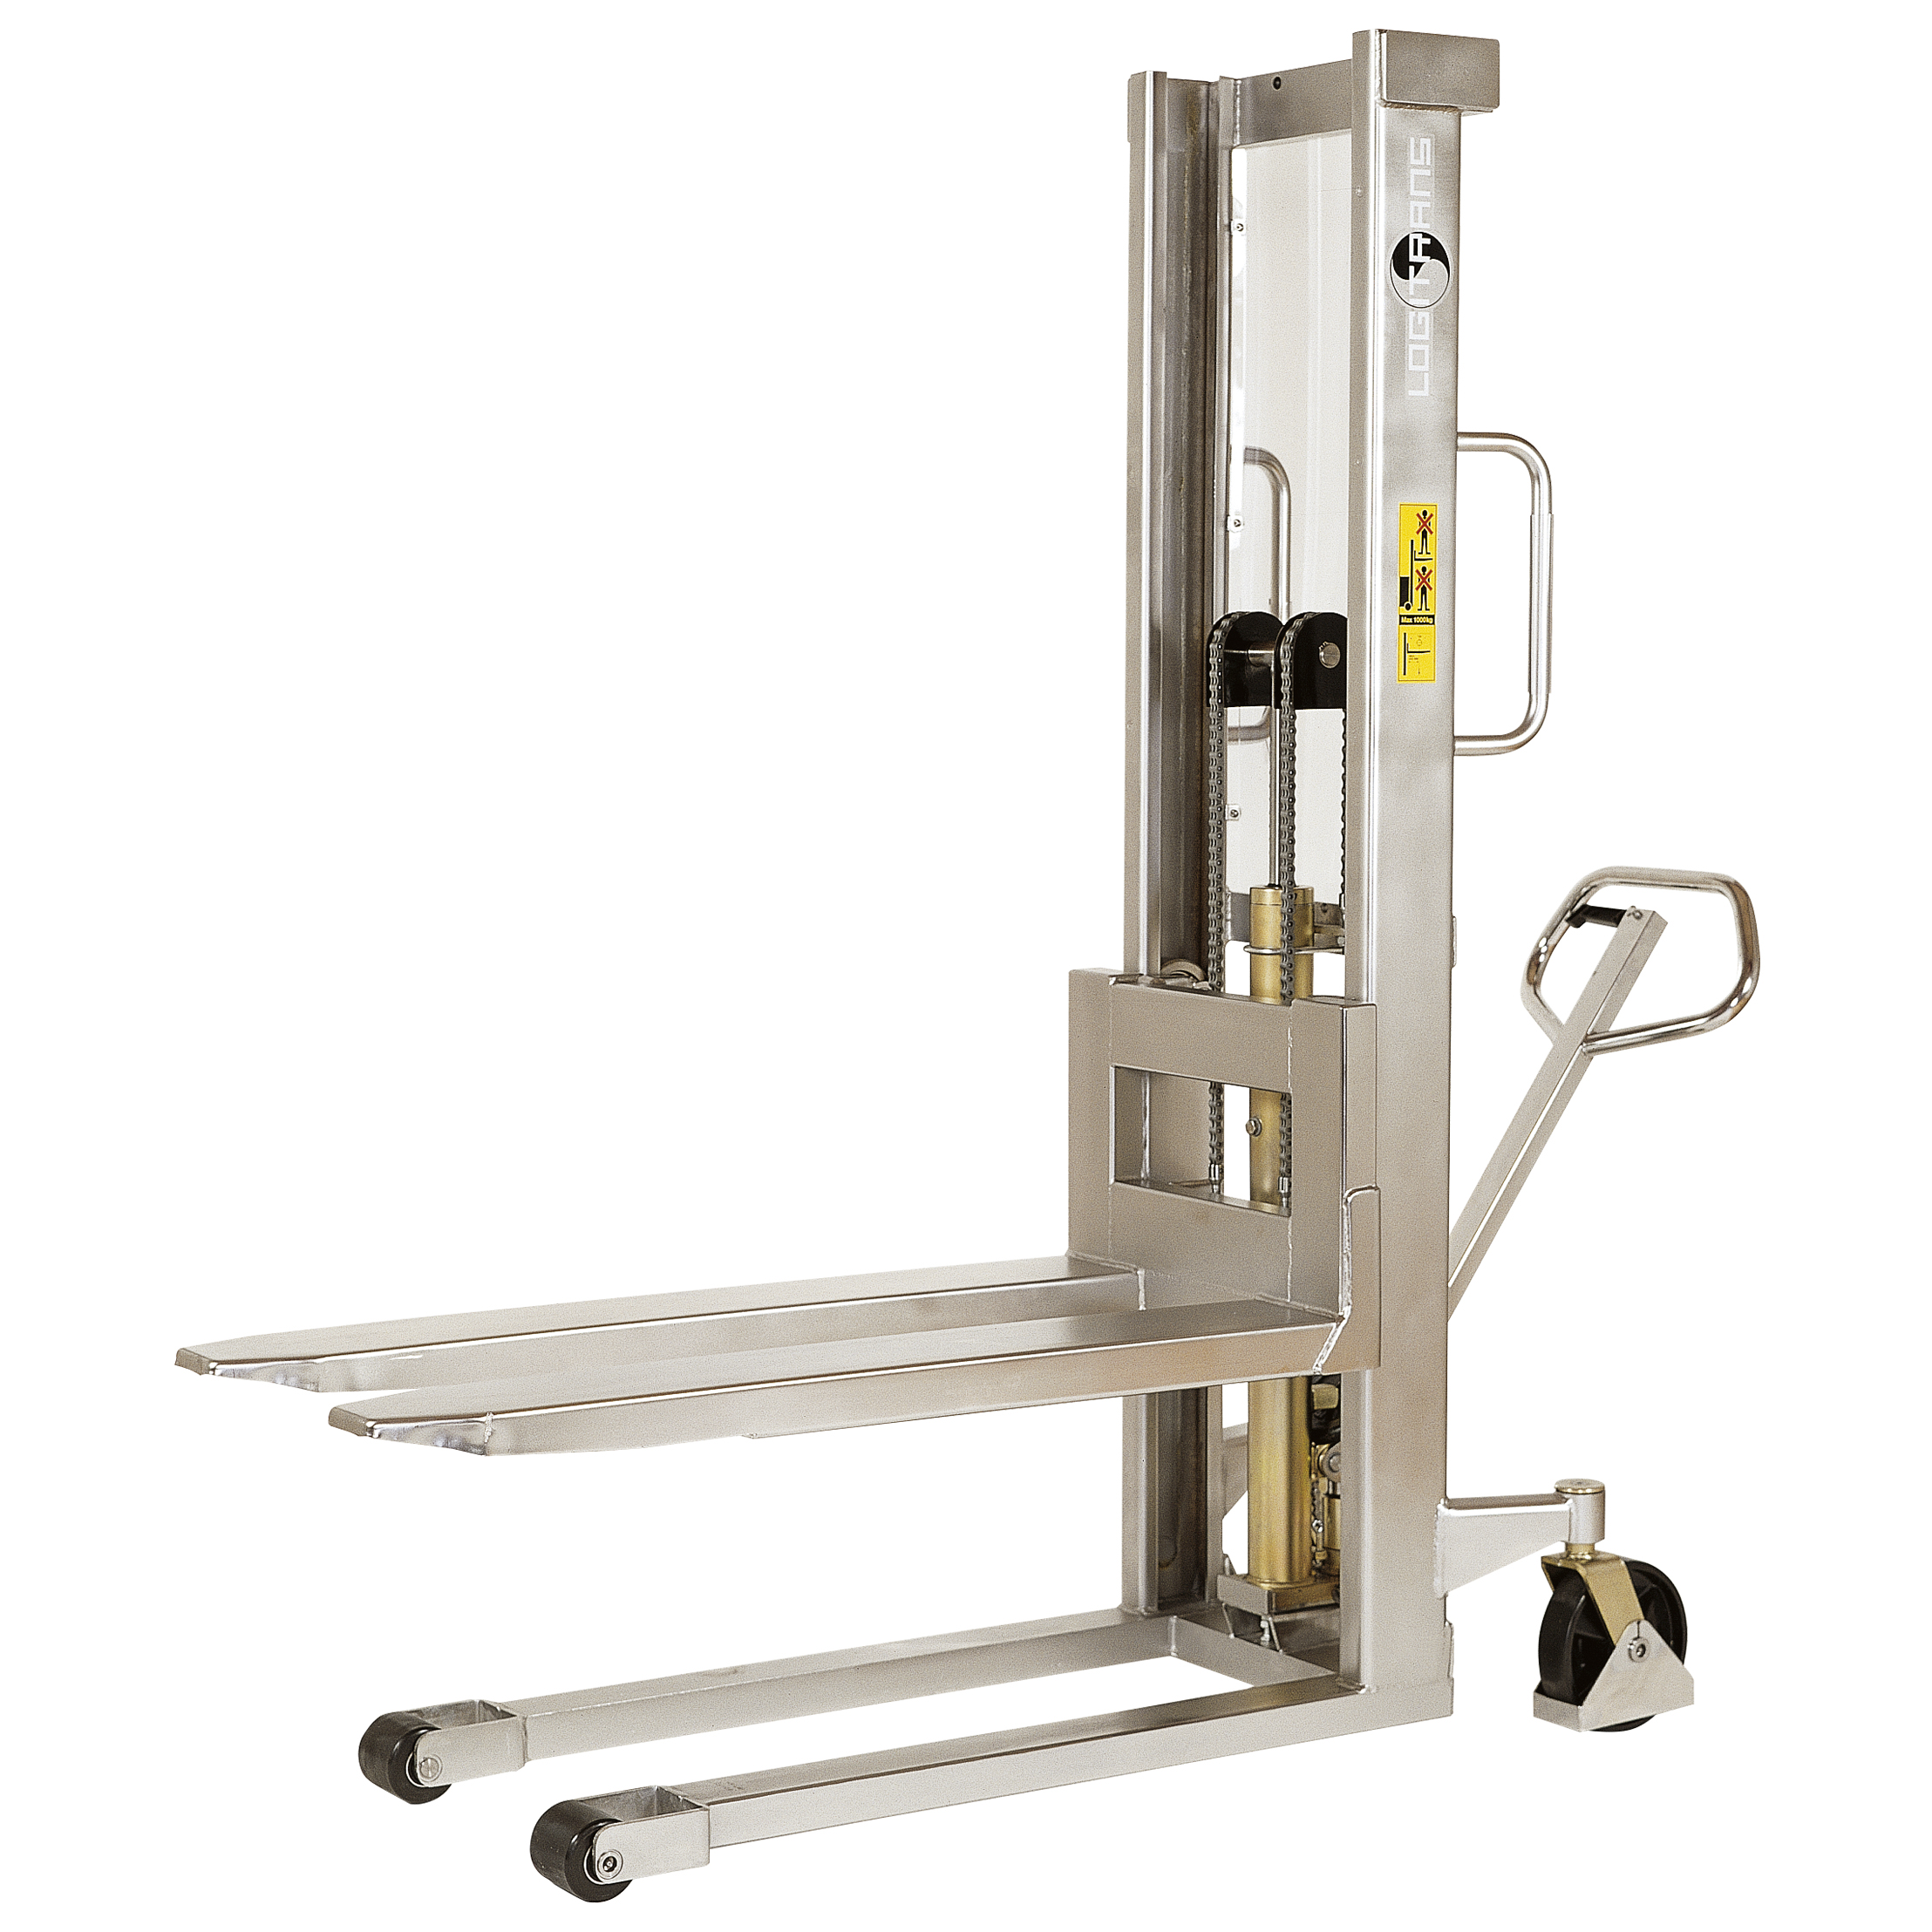 Stainless Stacker w/Fixed Carriage (Manual Lift/Manual Push) 